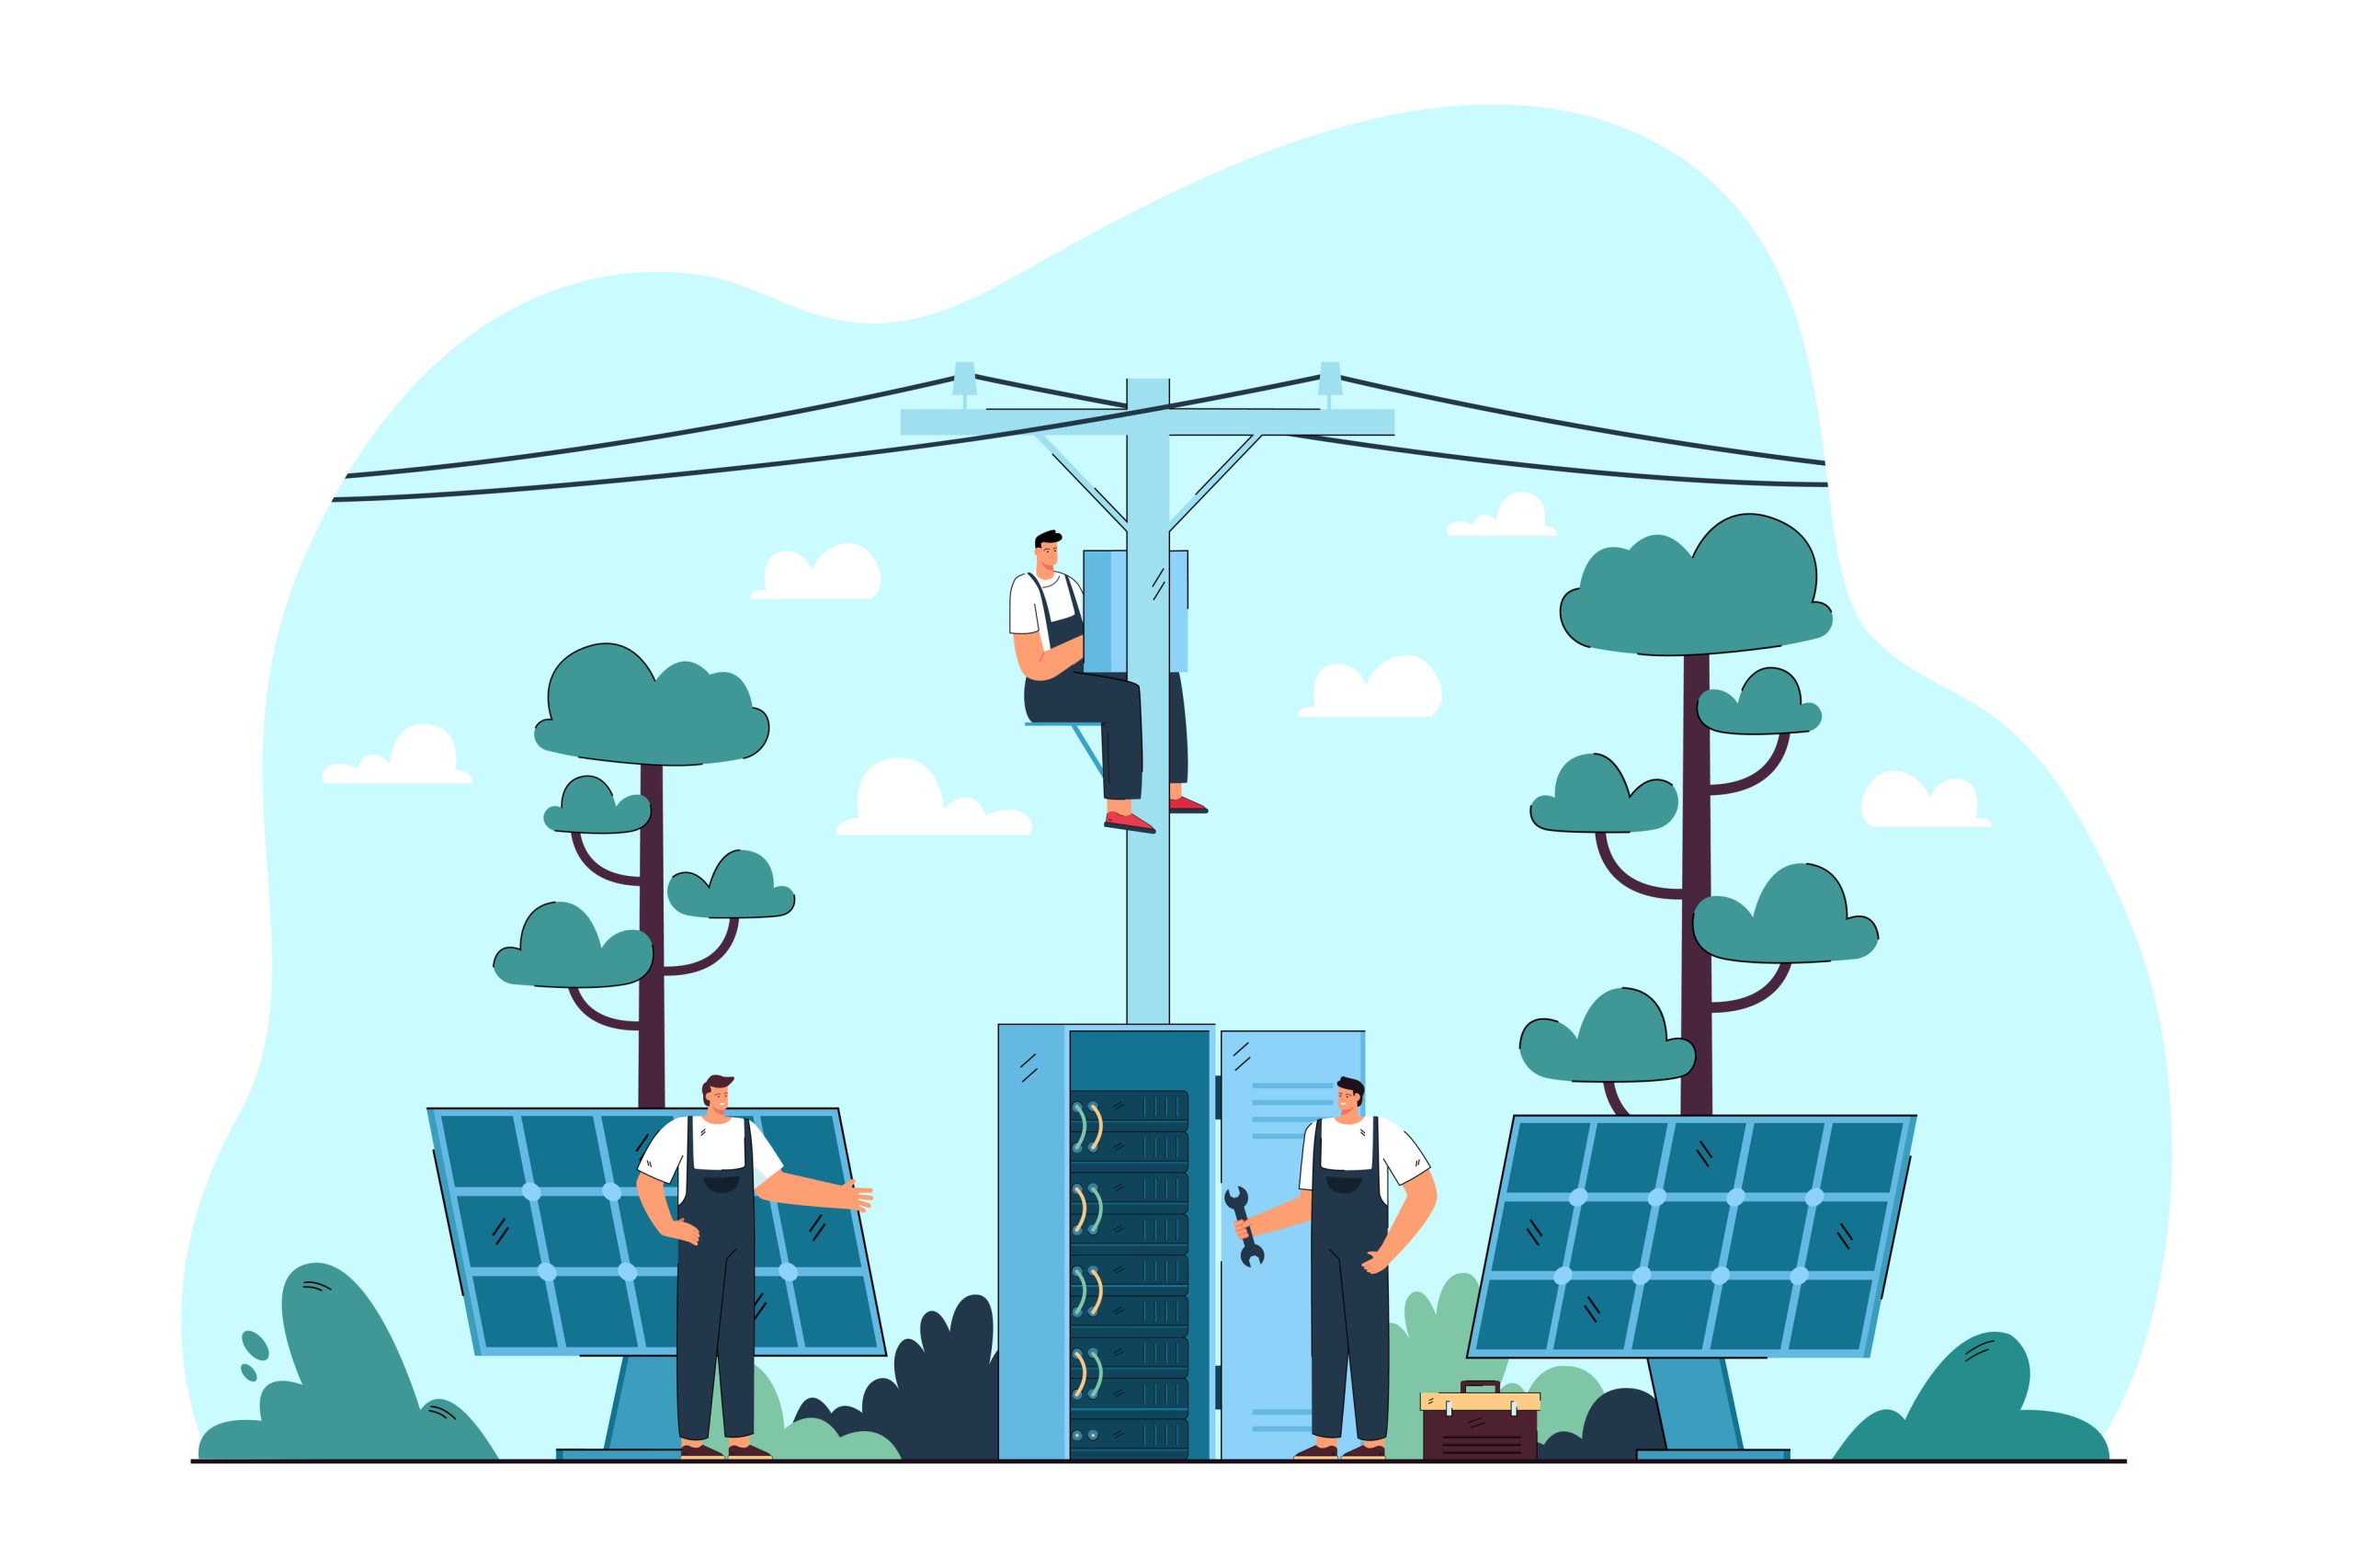 Electricians repairing electrical and solar panels on streets. Flat vector illustration. Masters fixing electrical equipment on ground and electric pole. Electricity, repair, service, safety concept